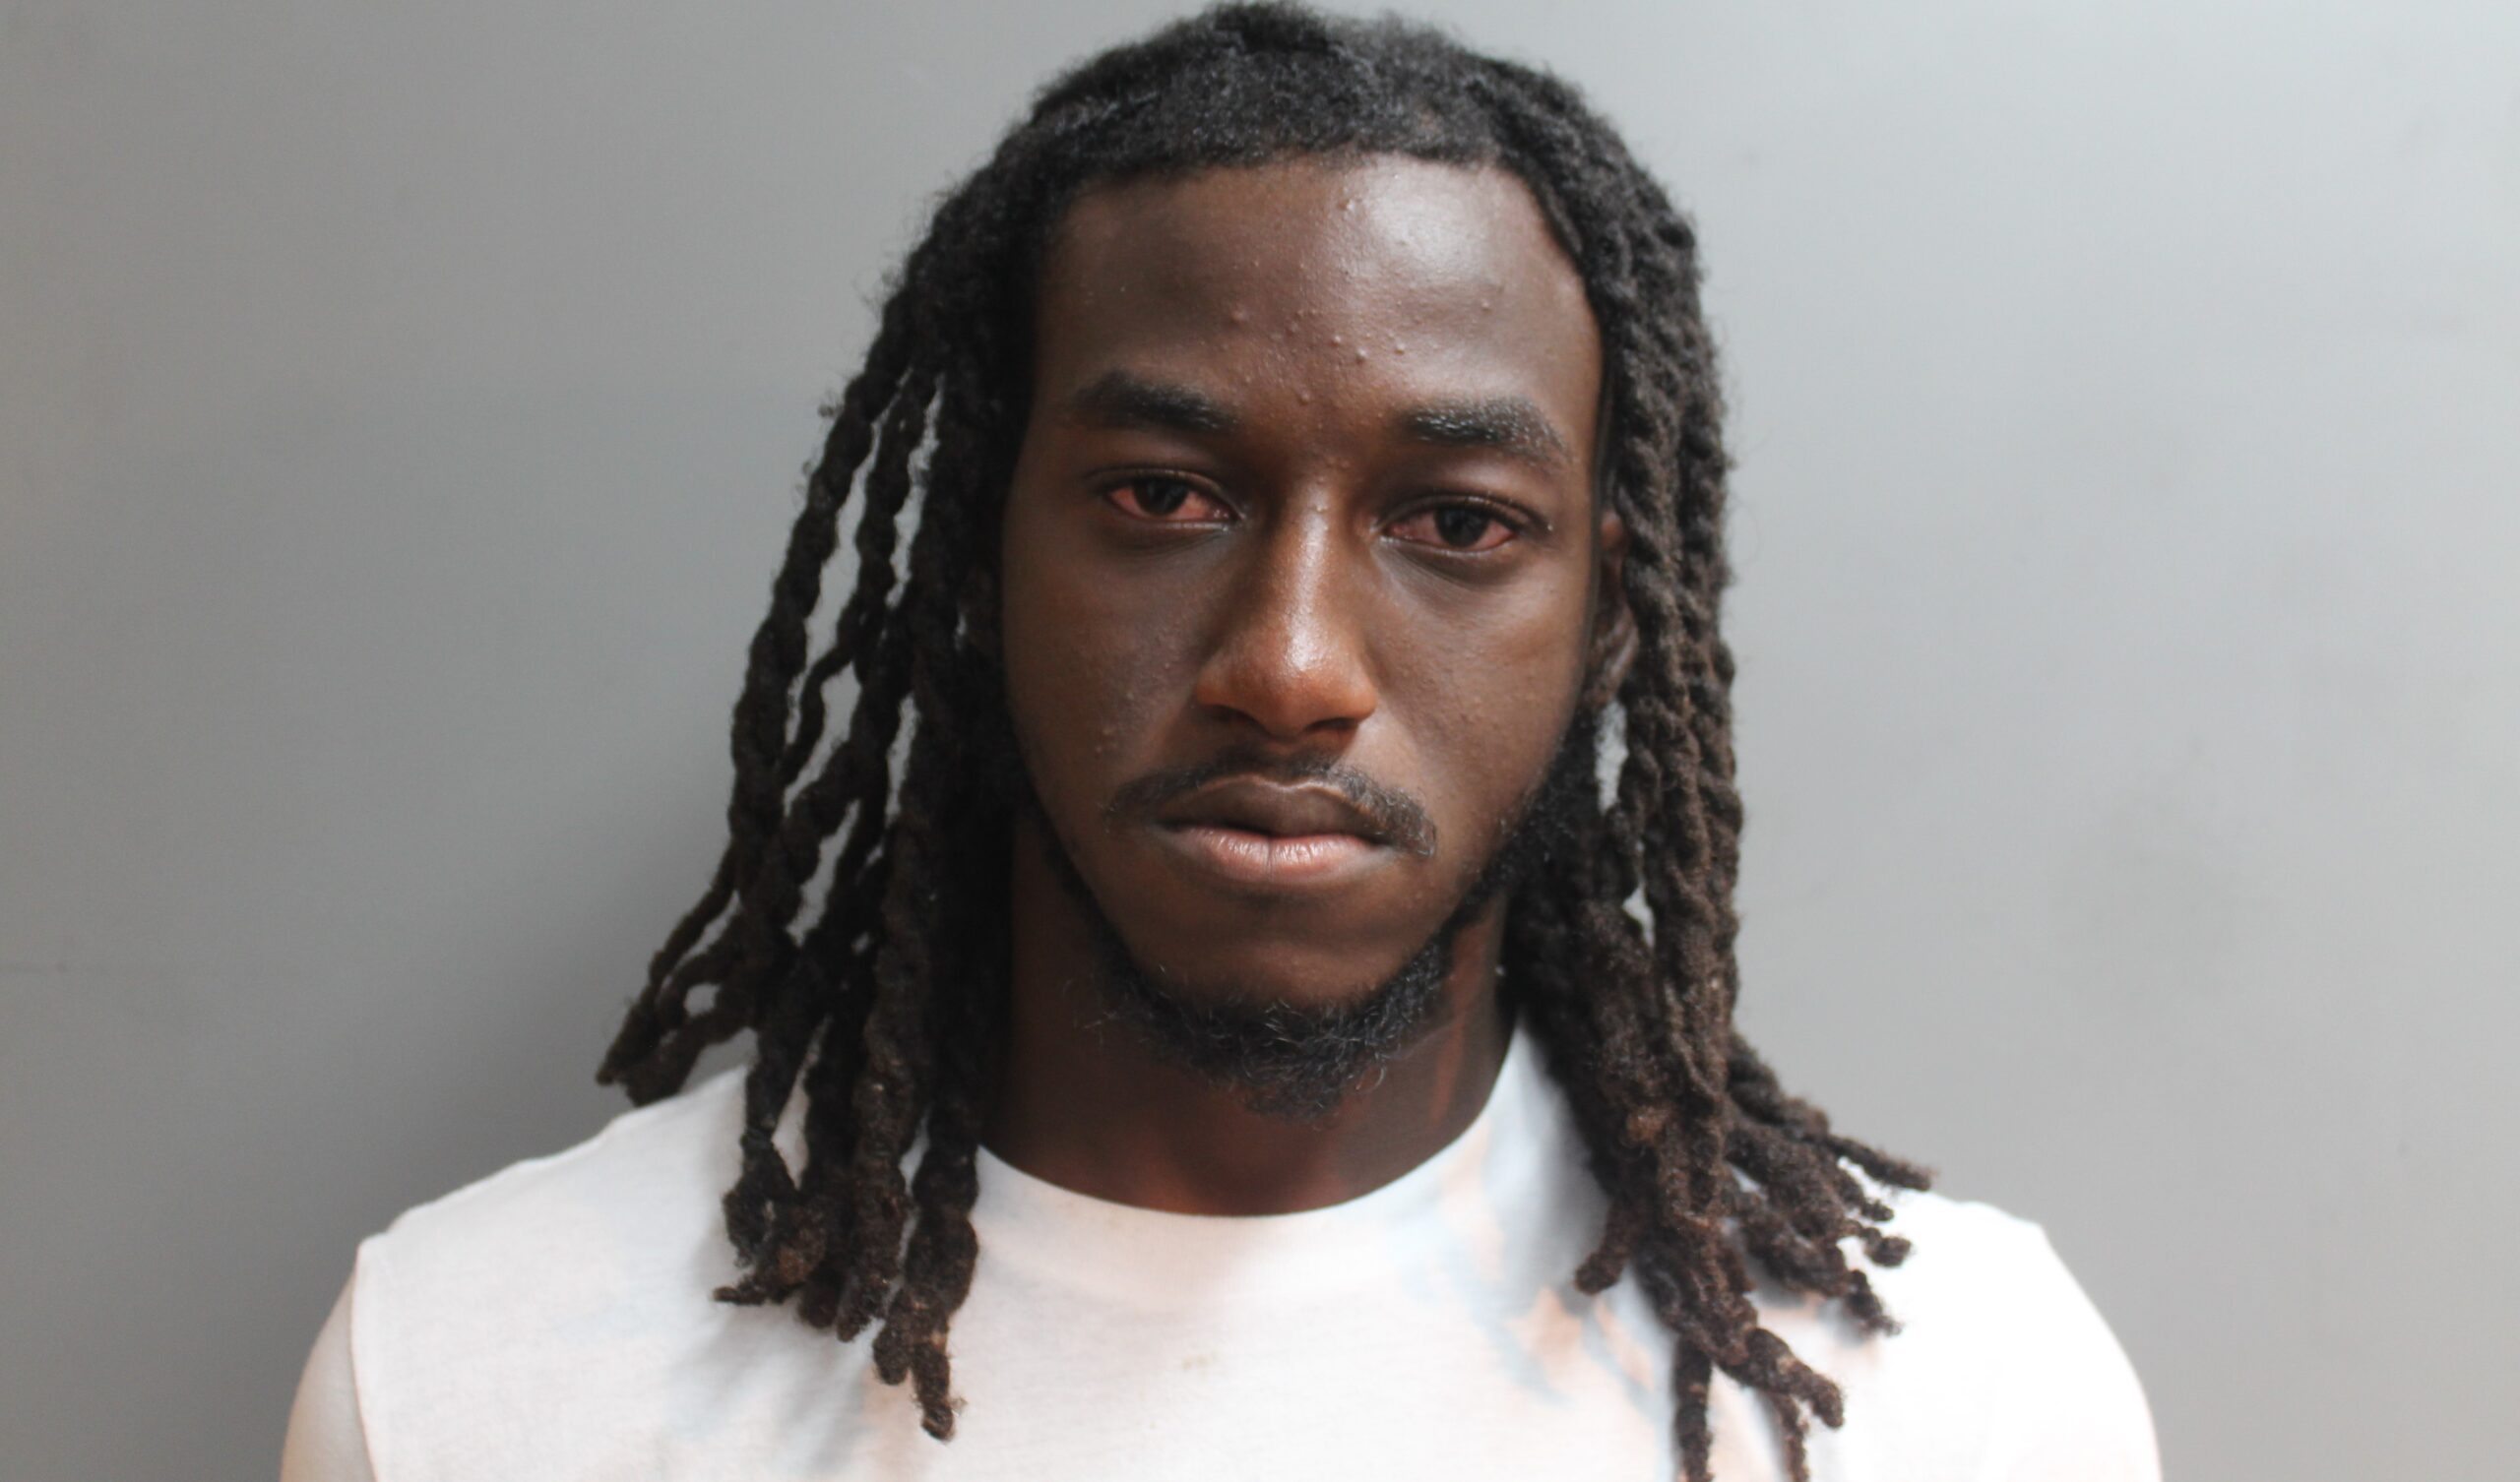 Whim Man Arrested For Shooting 5 Months Ago, Arrested On Illegal Gun Charge Tuesday: VIPD